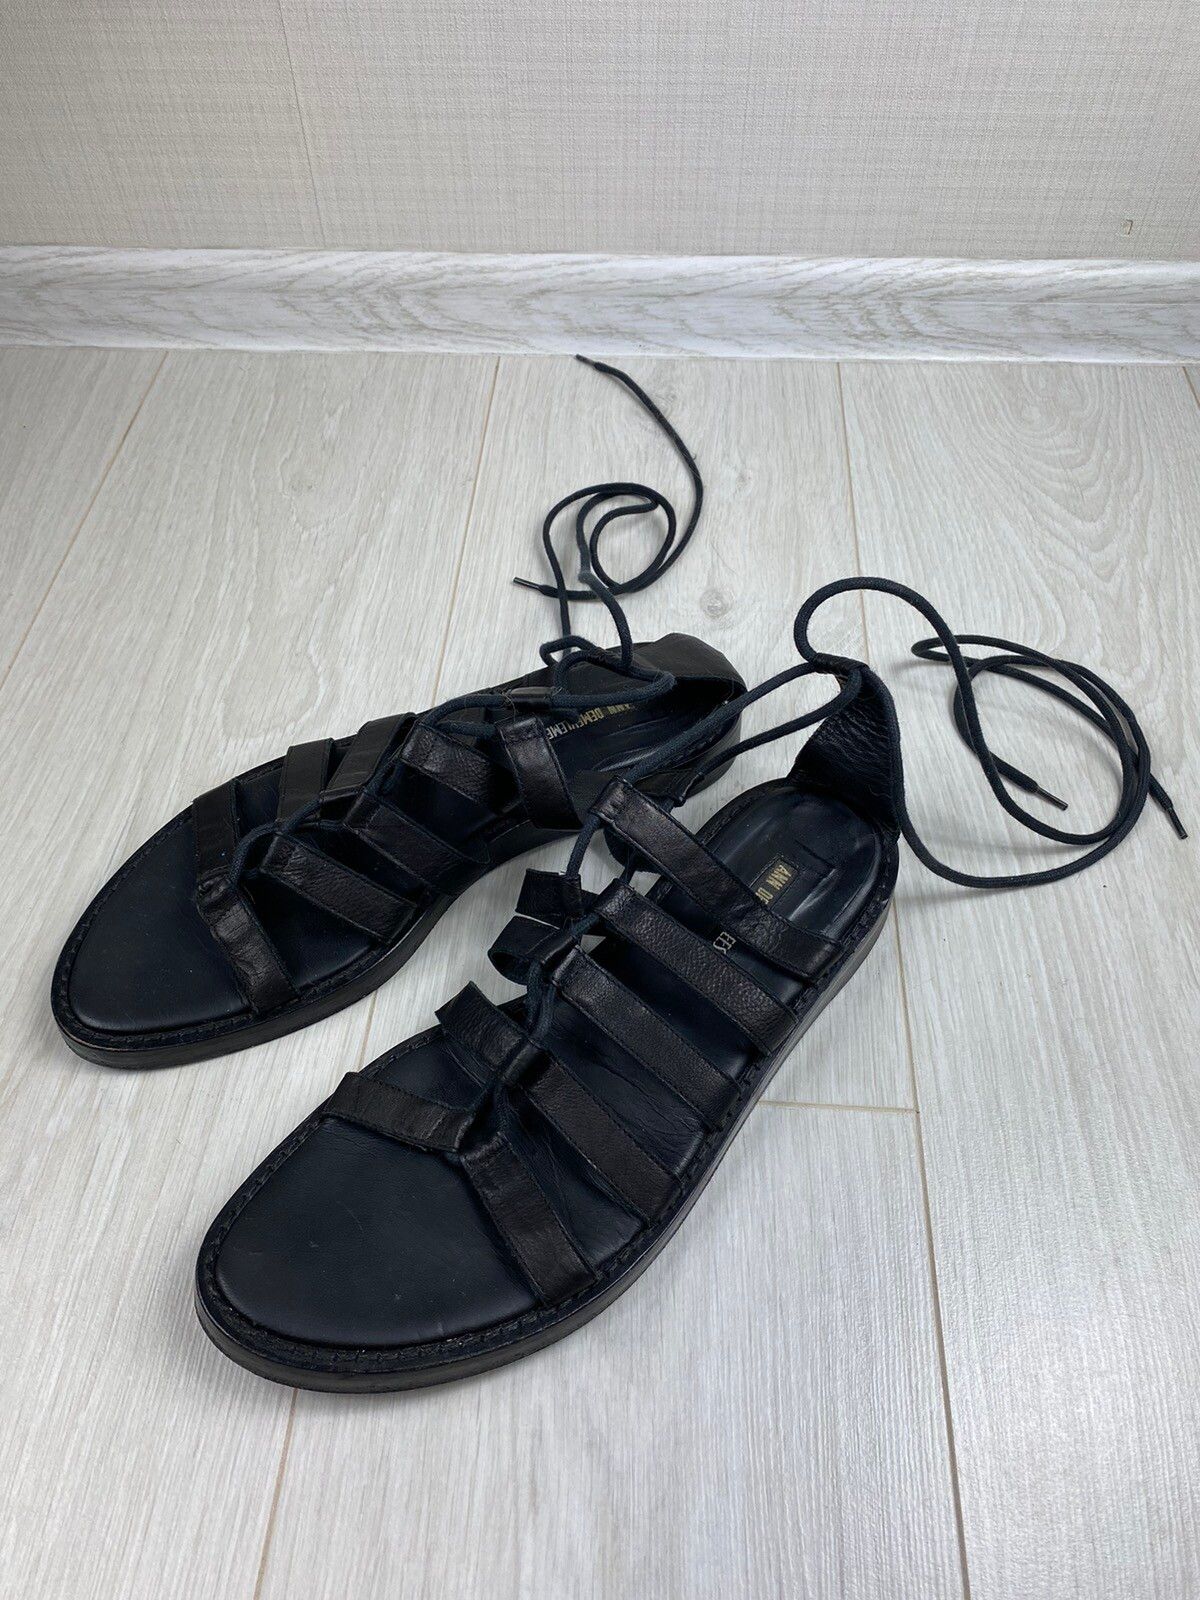 Vintage Ann Demeulemeester Leather Flat Gladiator Sandals High Size US 9 / EU 42 - 2 Preview